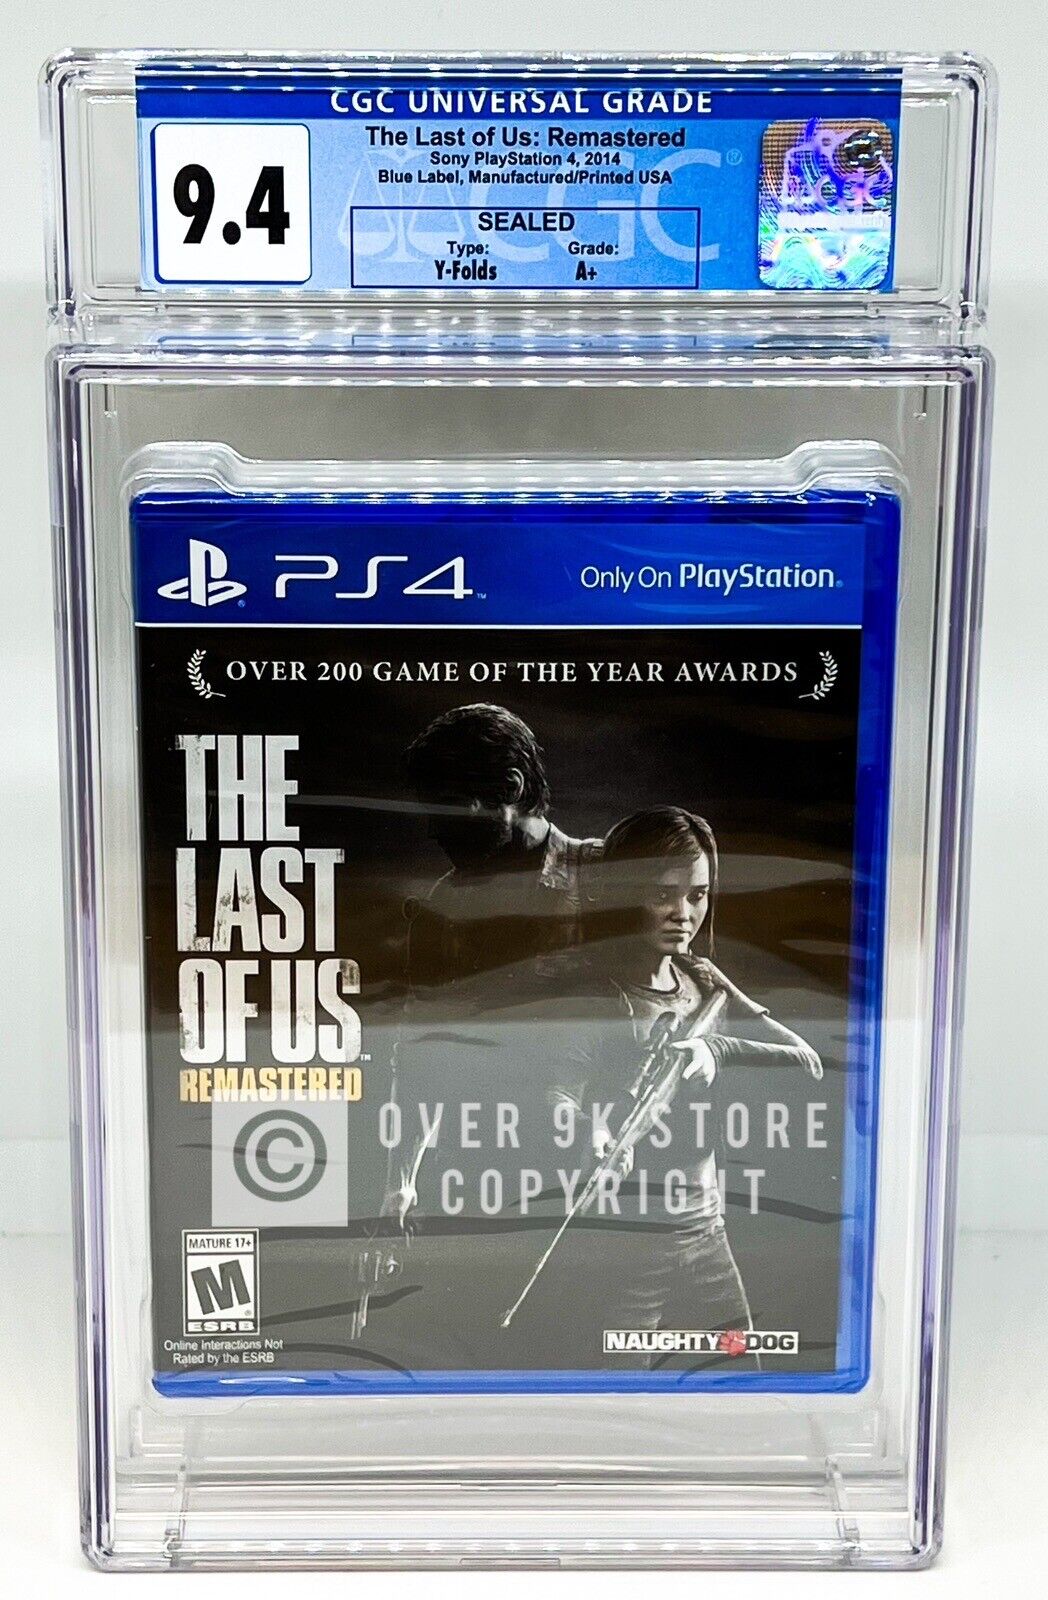 The Last of Us Part II on PS4 reviews draw near universal acclaim